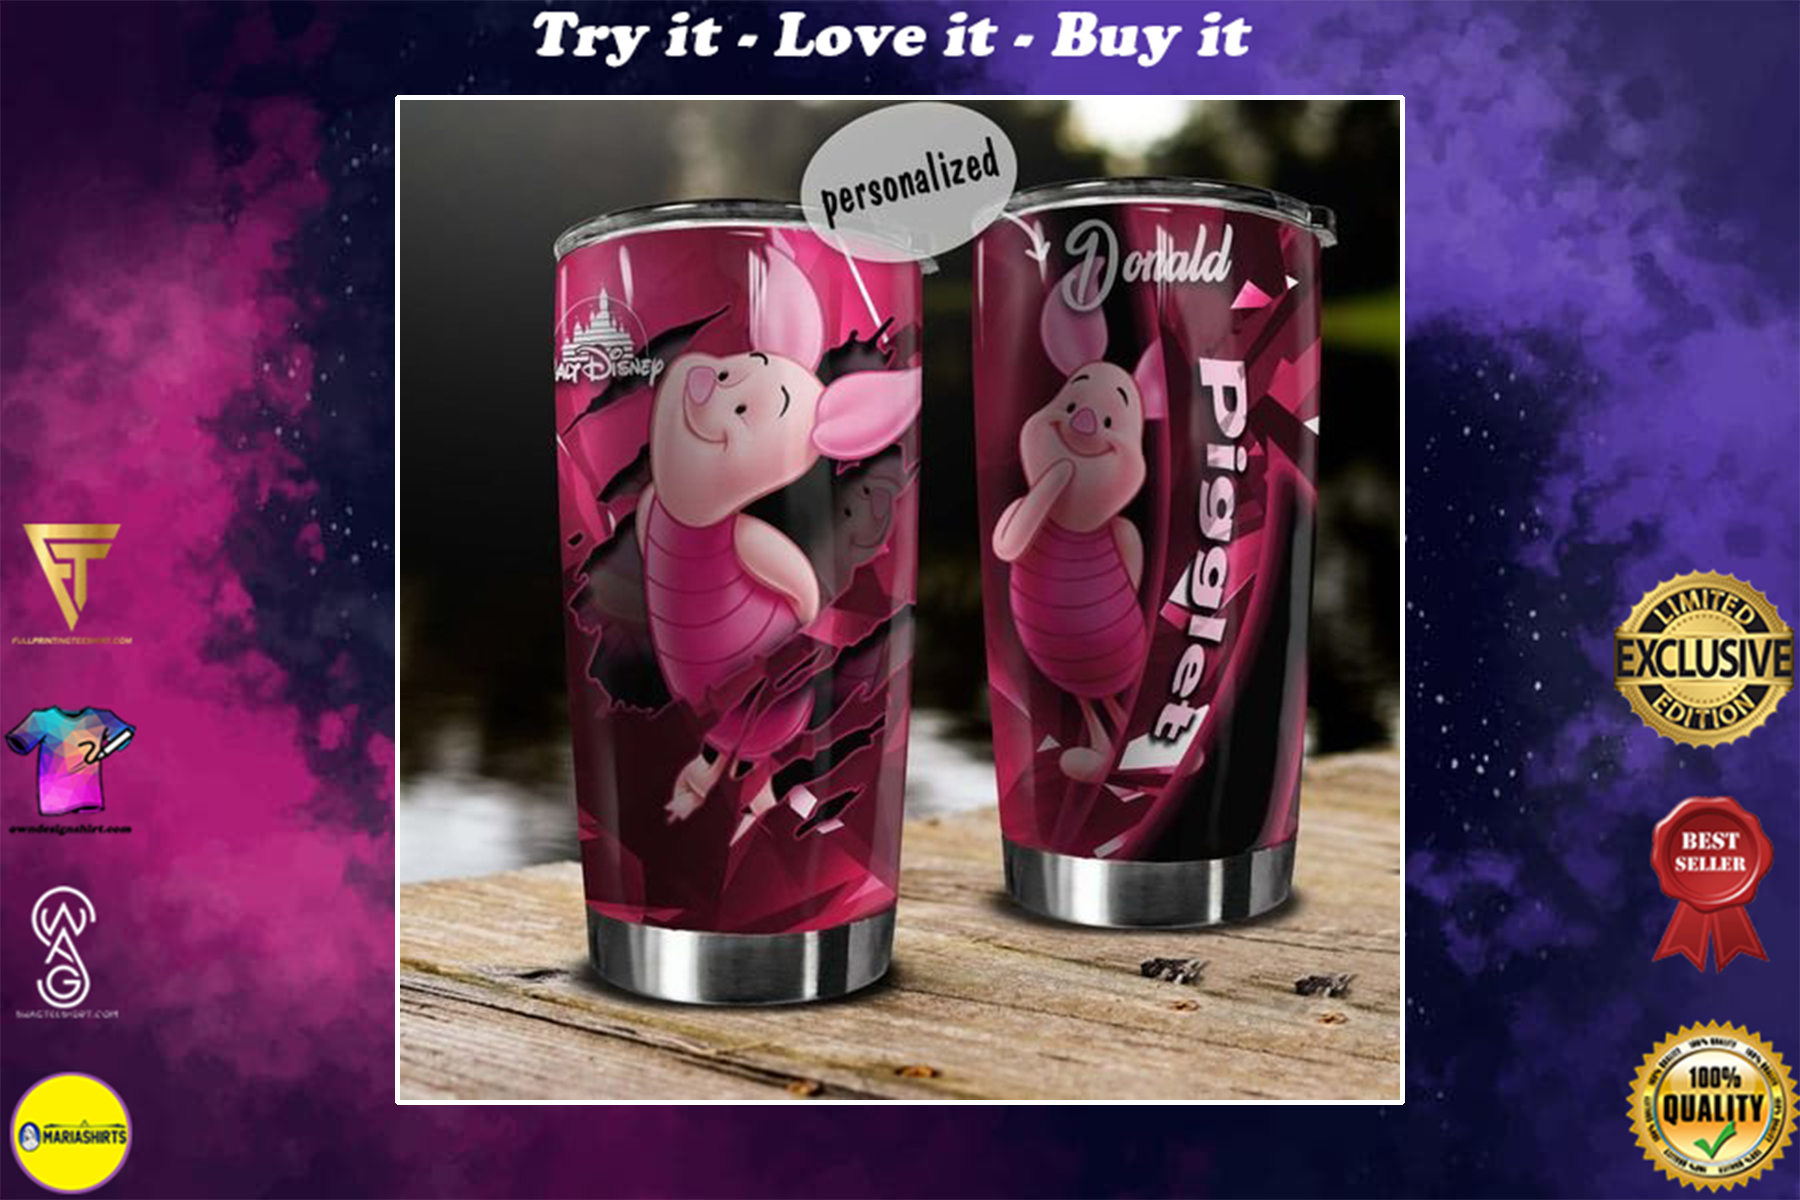 personalized name piglet winnie?the?pooh tumbler